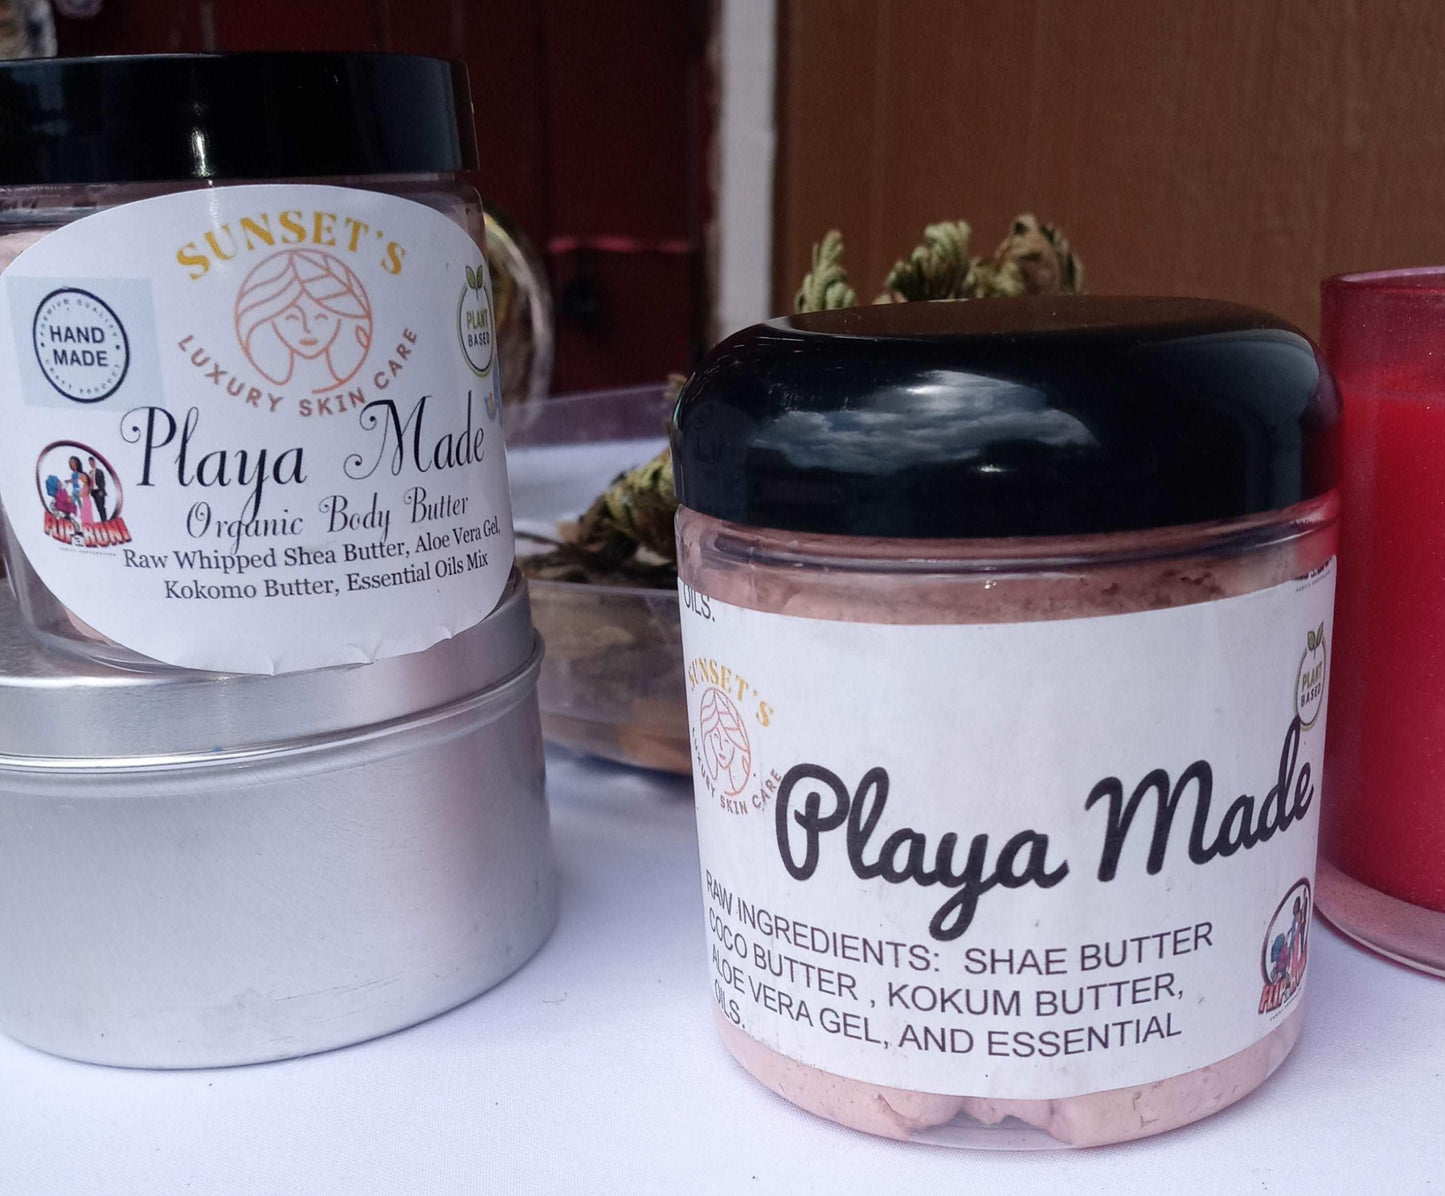 Playa Made Male Body Butter by Sage N Thangs